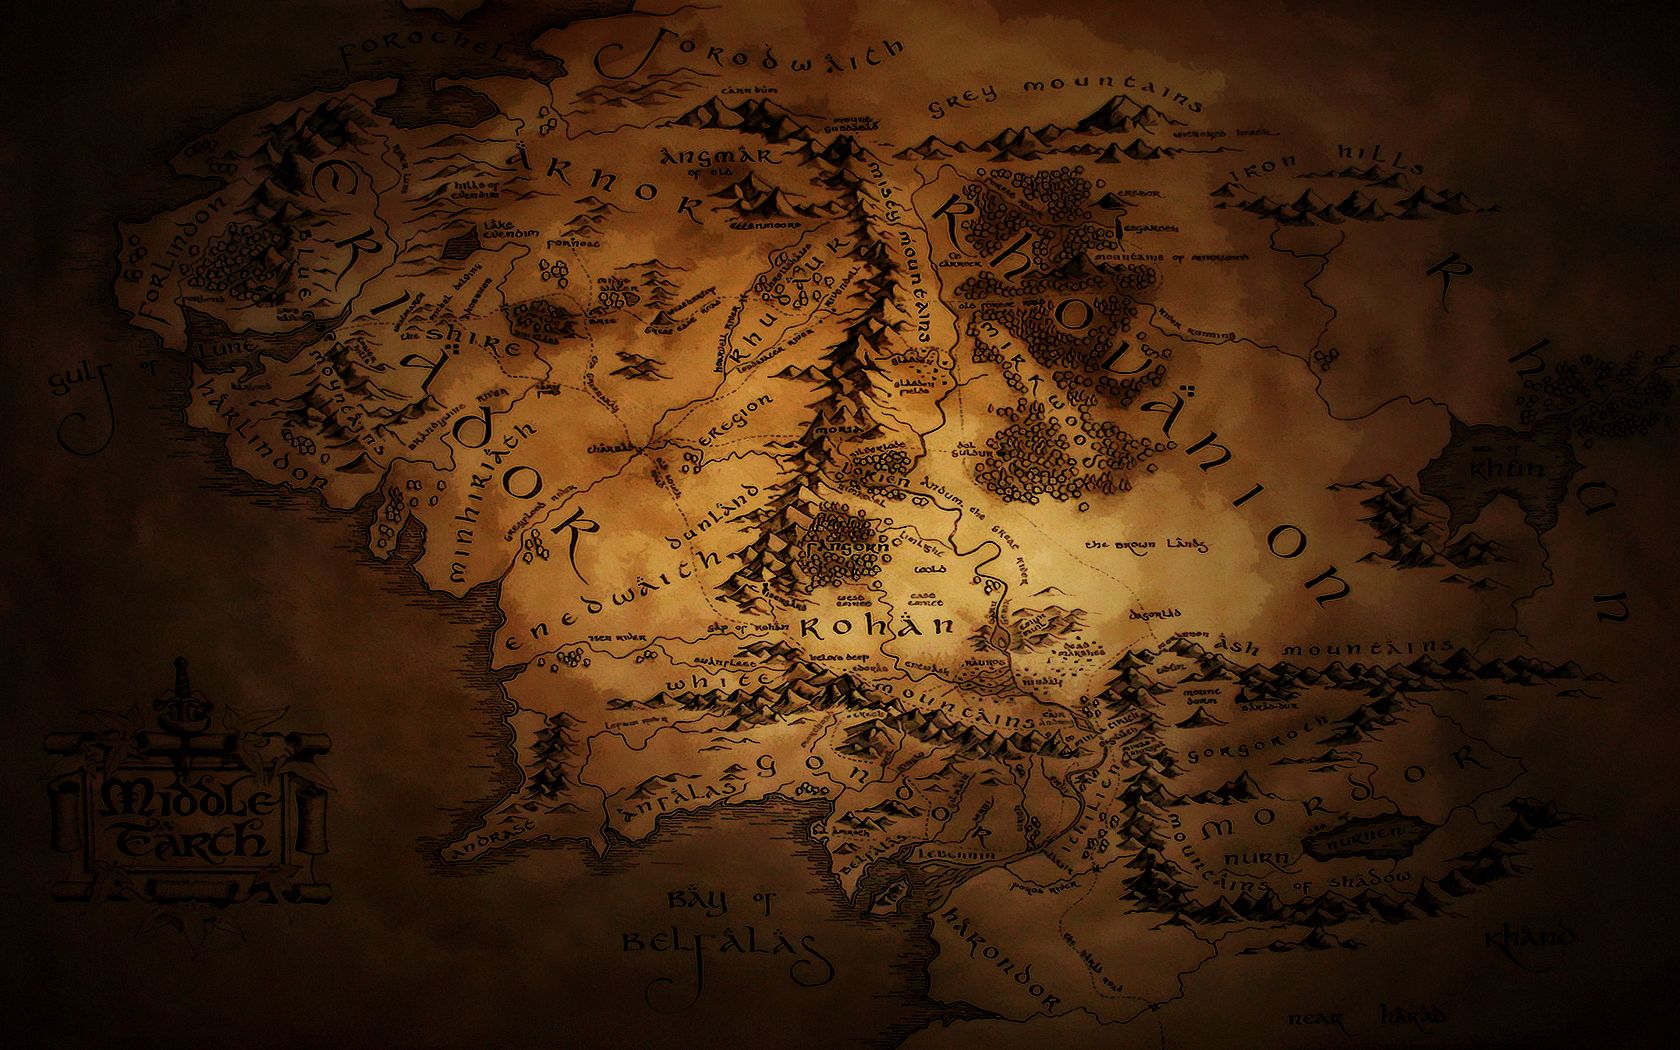 Middle earth map wallpaper 2560x1600 download Middle Earth Map wallpaper 2560x1600 download - Earth